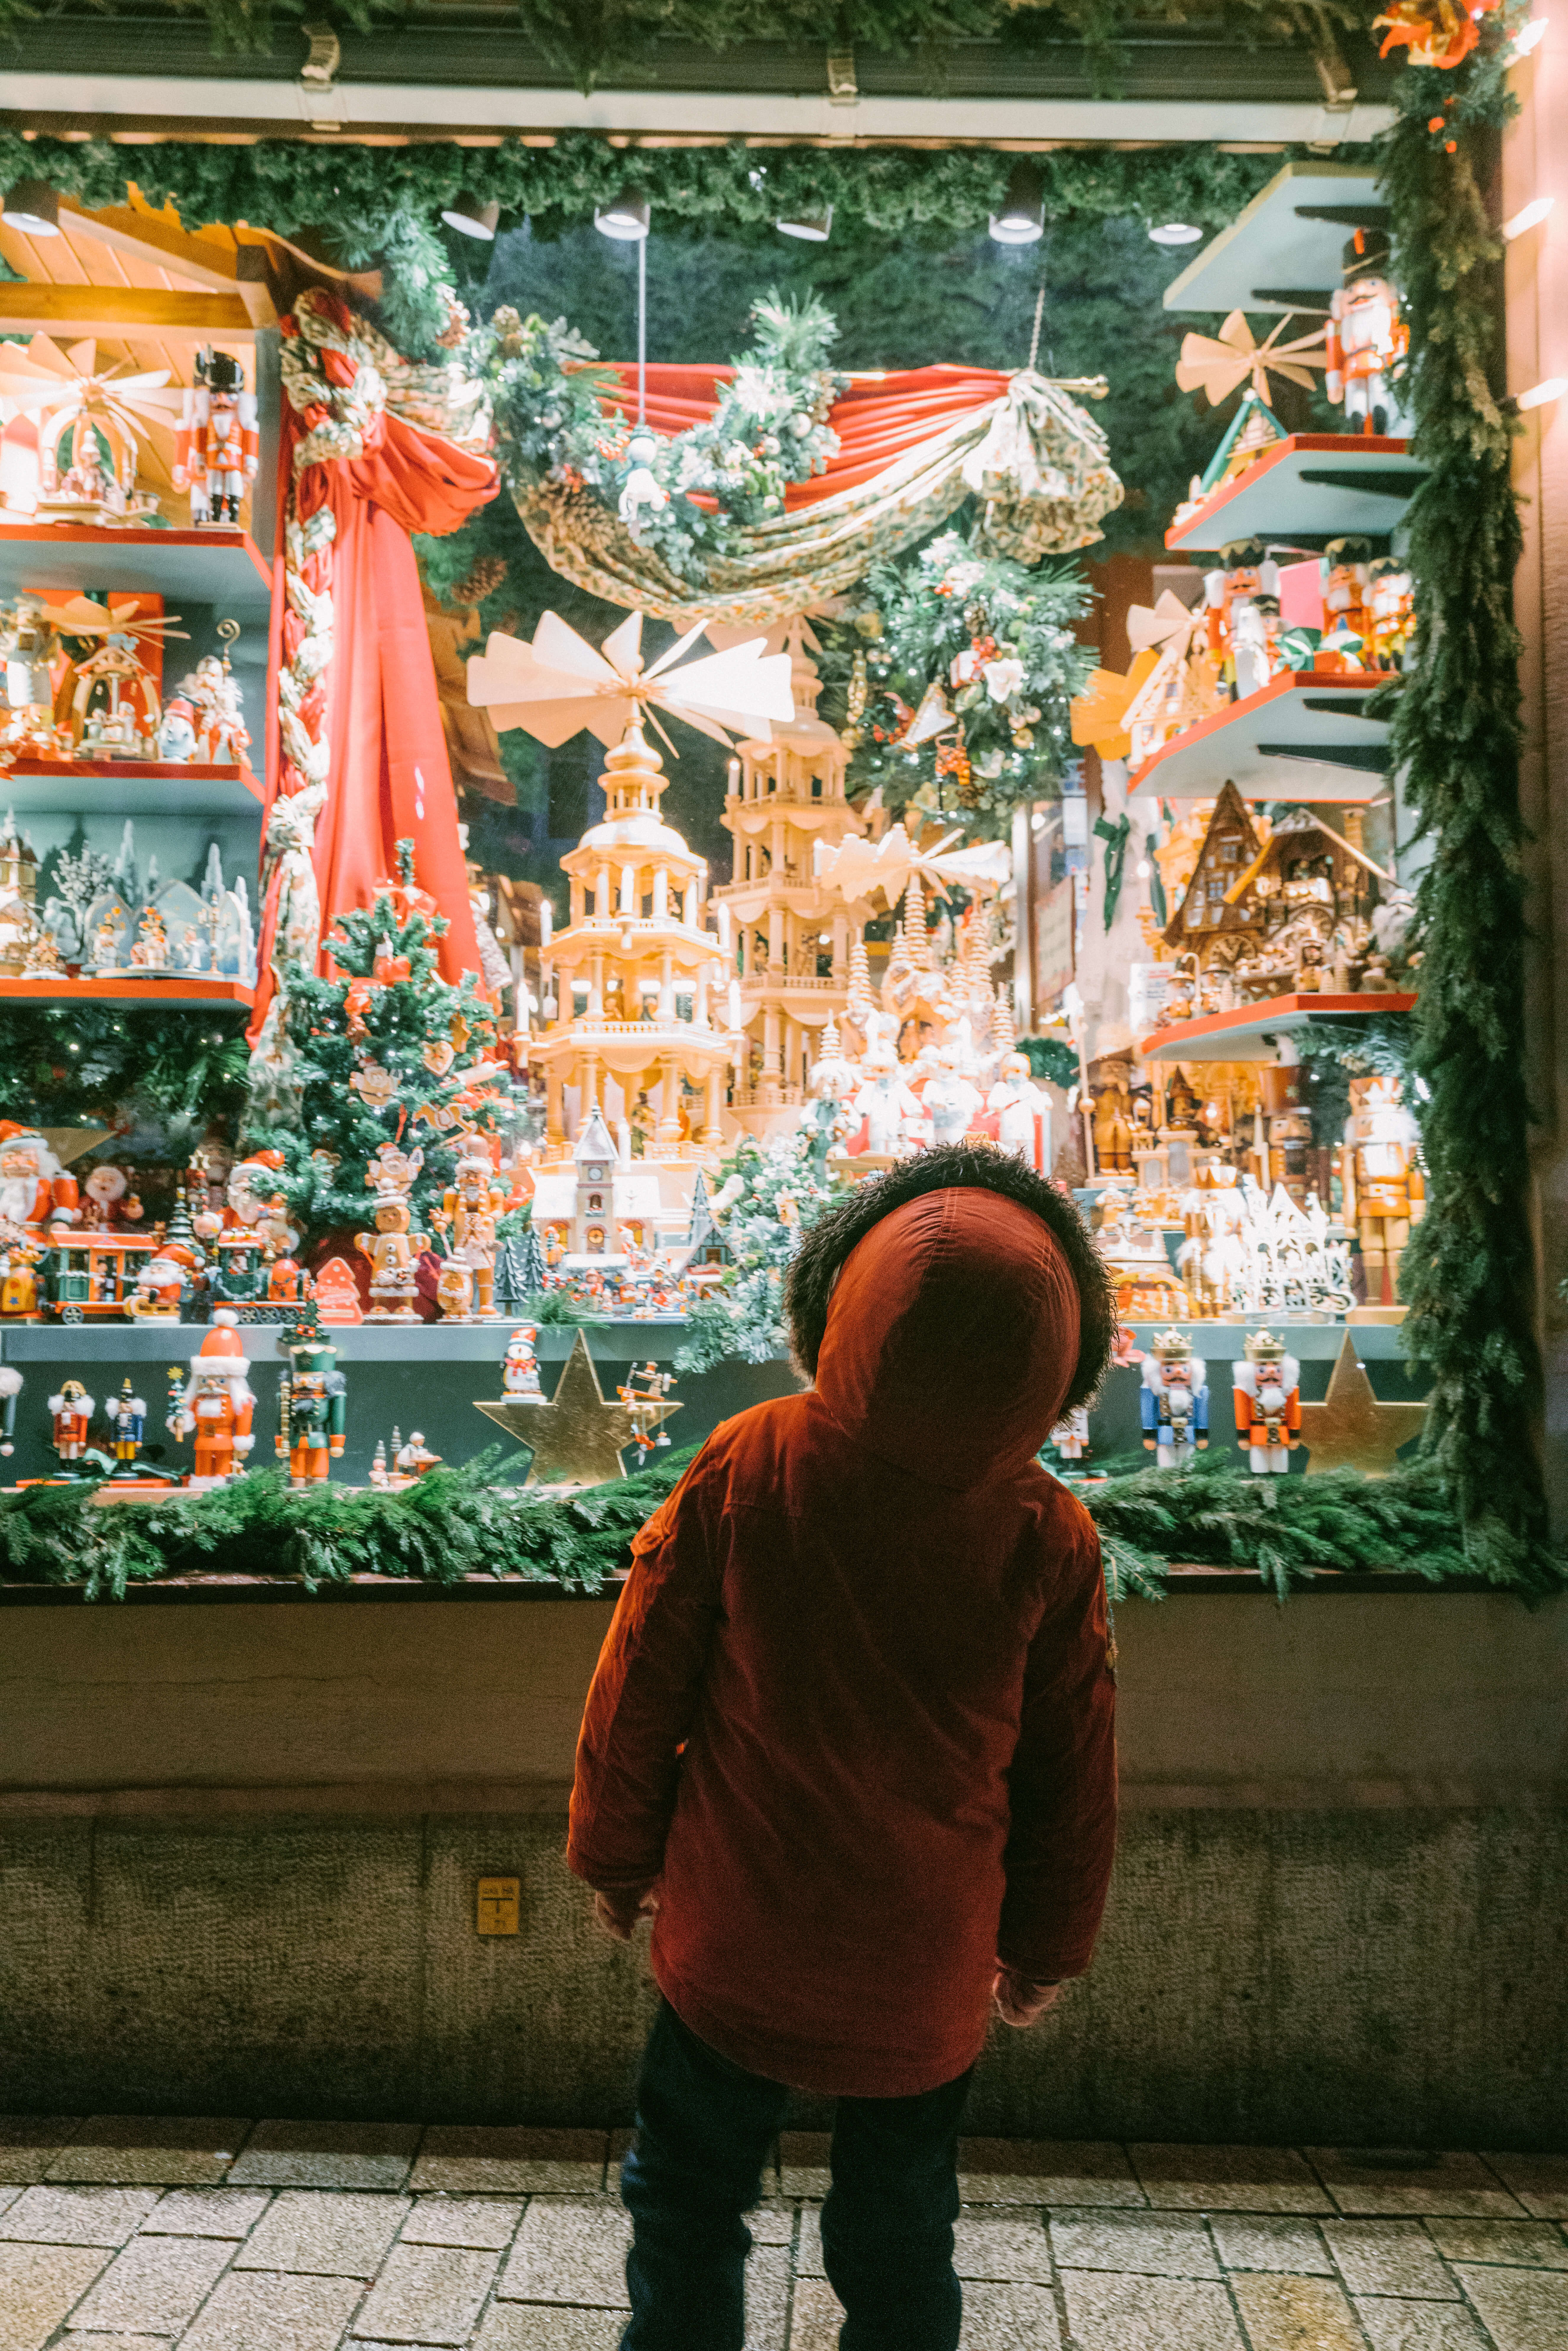 The Prettiest Holiday Window Displays in New York City This Year